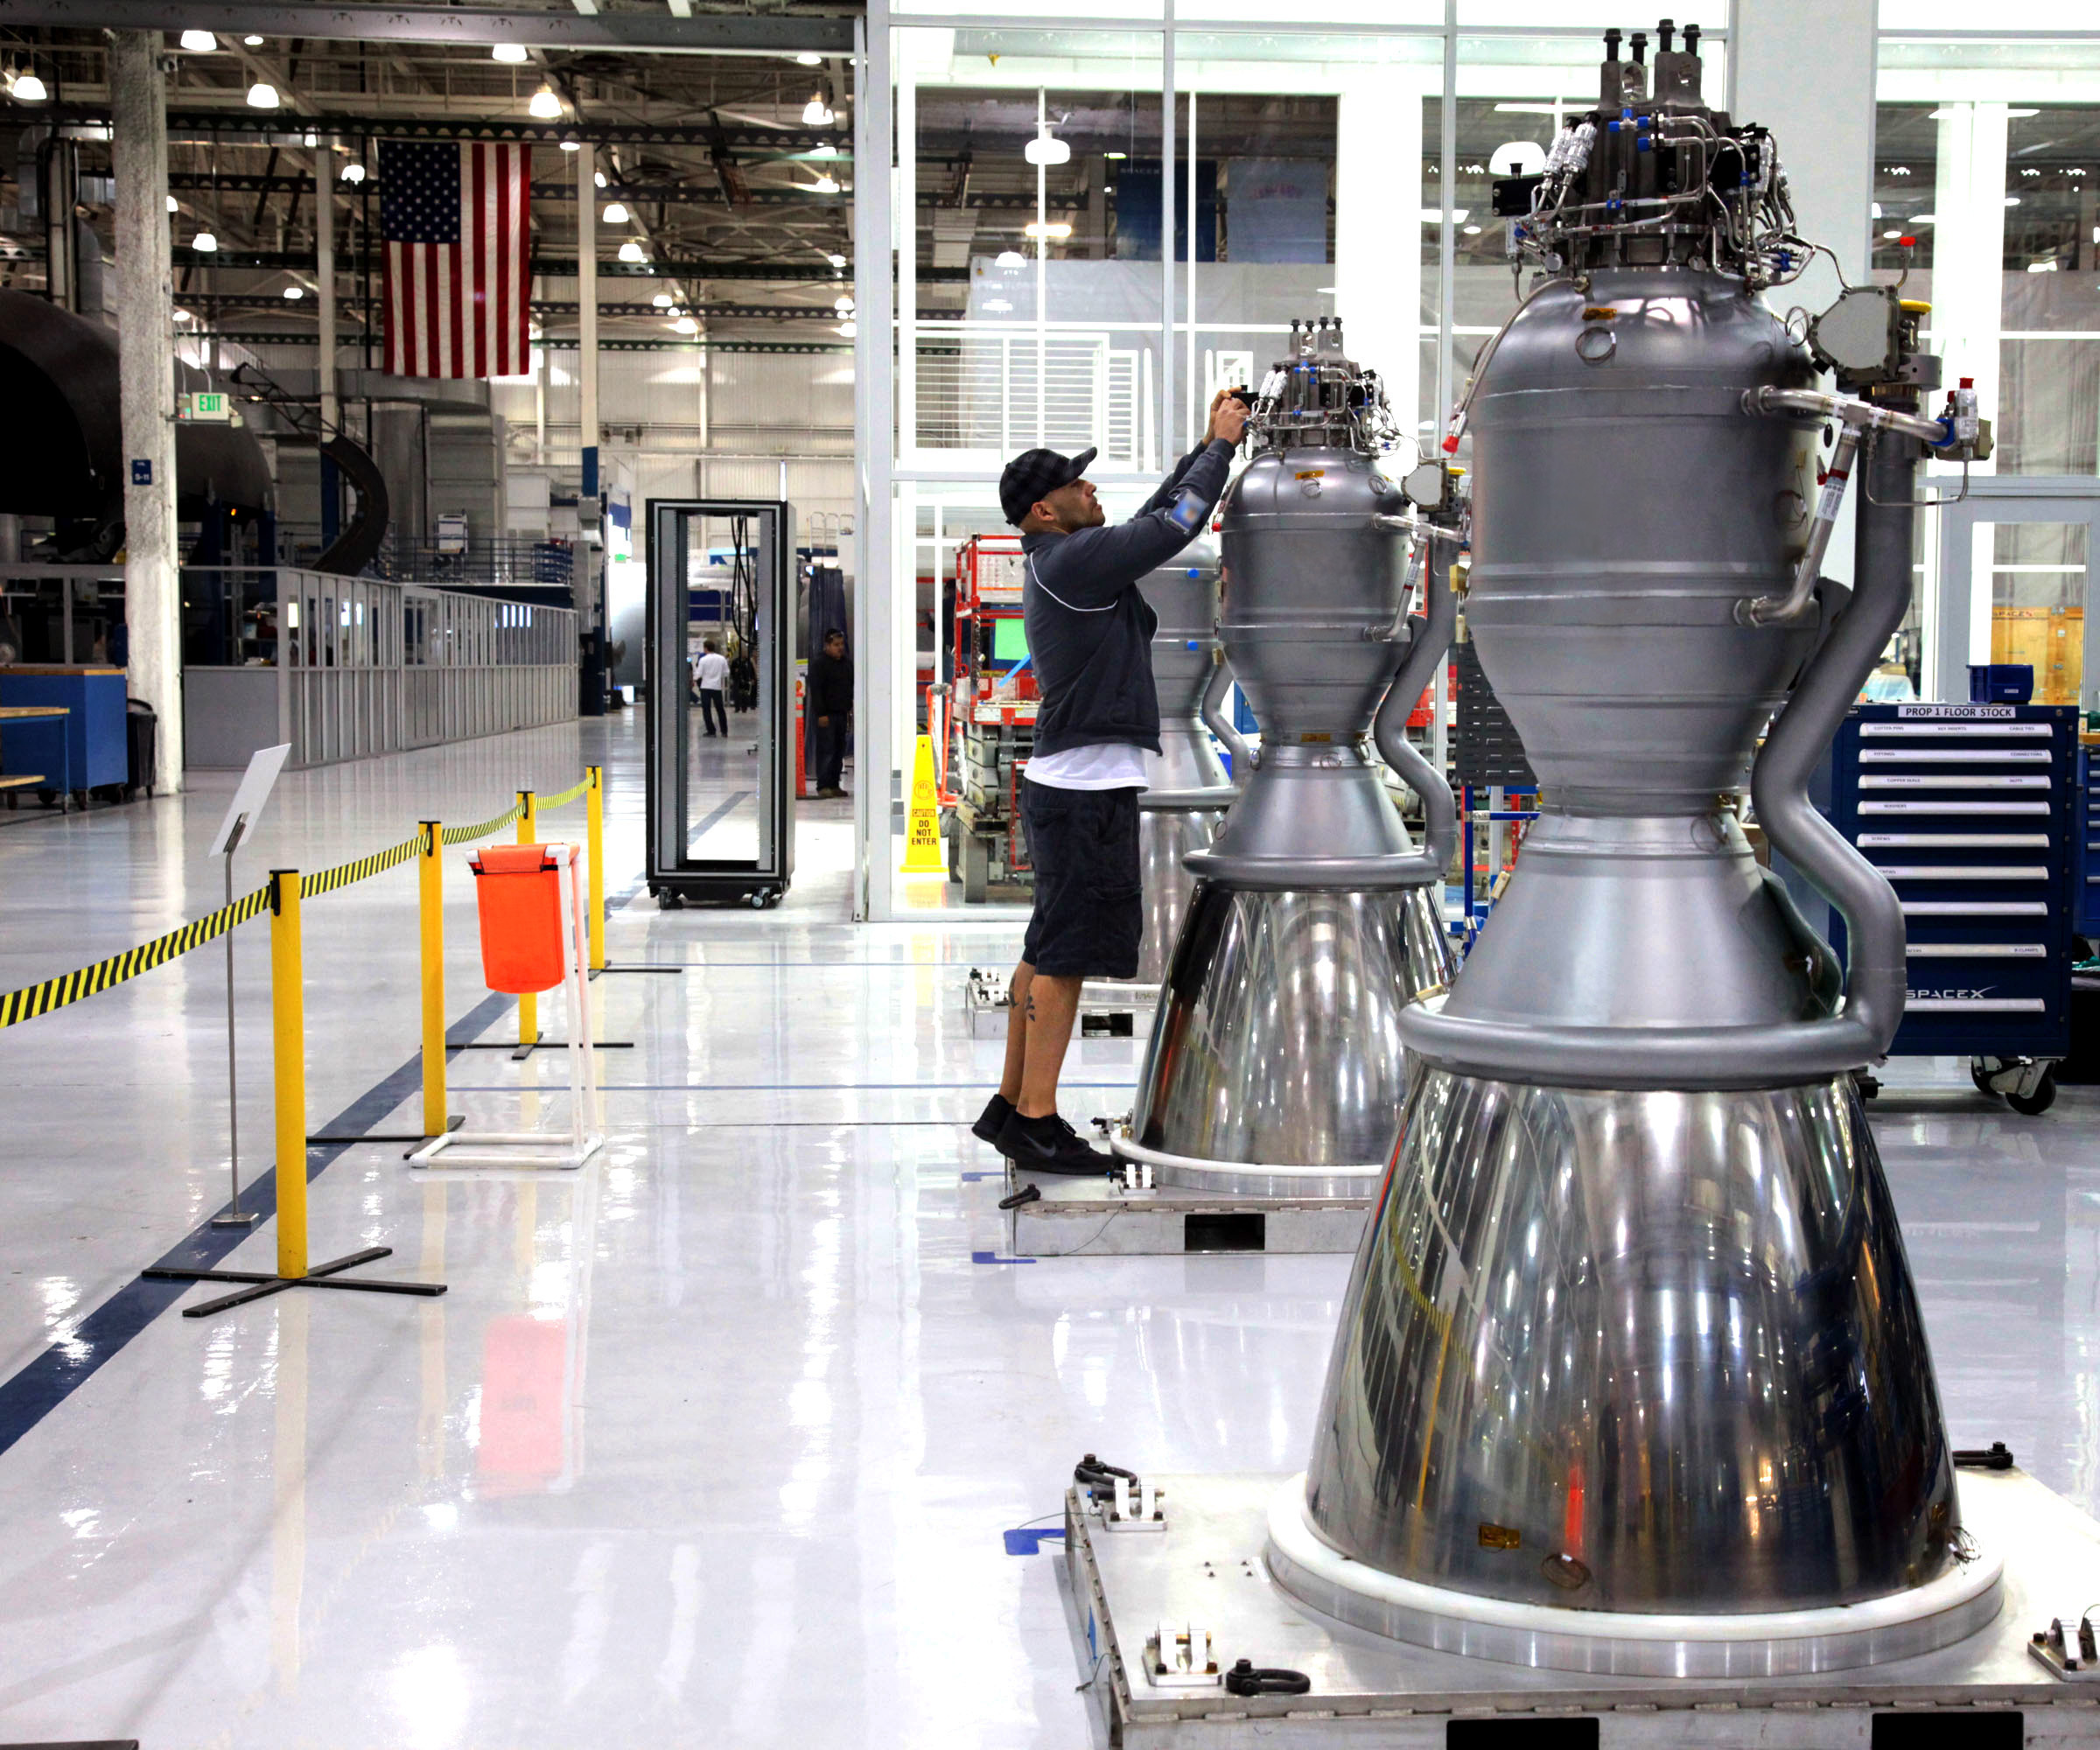 Are SpaceX engines 3D printed?